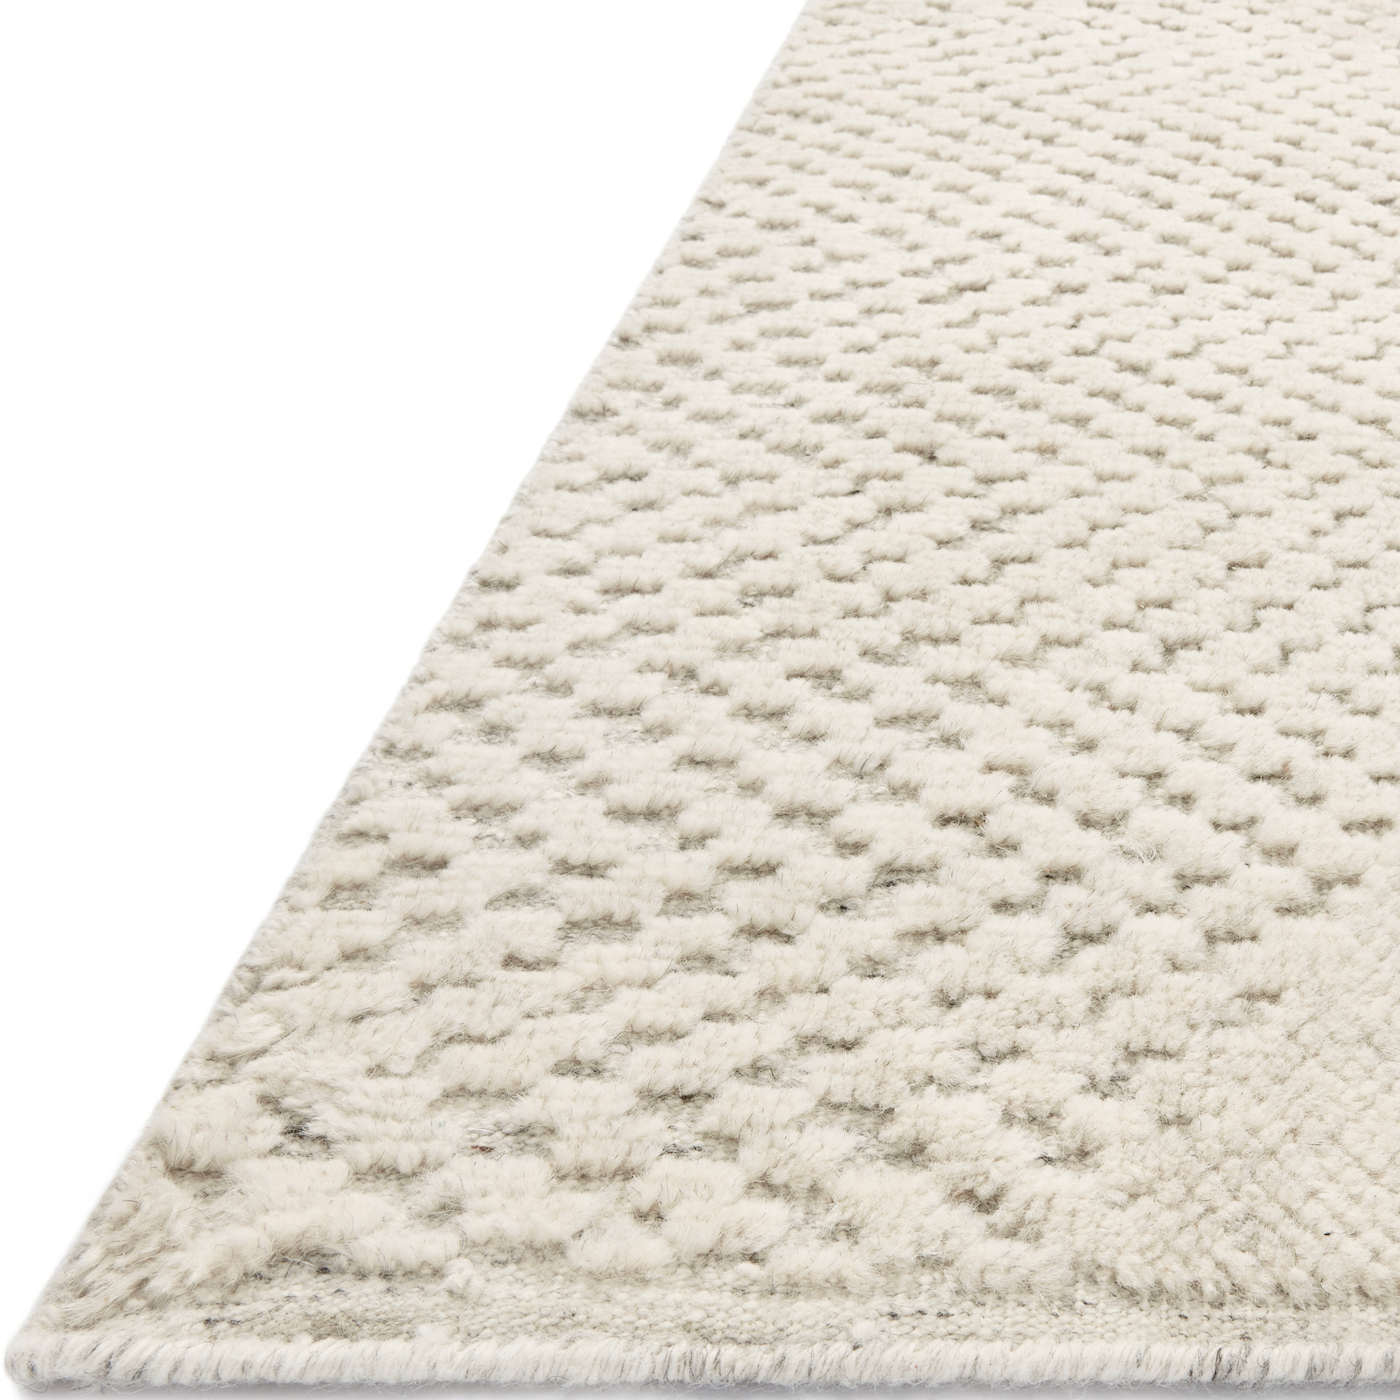 The Collins COI-02 Amber Lewis x Loloi Ivory / Ivory rug for Amber Lewis x Loloi is hand-knotted of wool and cotton by skilled artisans in India. Collins is also GoodWeave-Certified and features varying knotting techniques interwoven to create a uniquely texture pattern, elevating any space with this versatile neutral. Amethyst Home provides interior design, new construction, custom furniture, and rugs for the Omaha and Lincoln, Nebraska metro area.